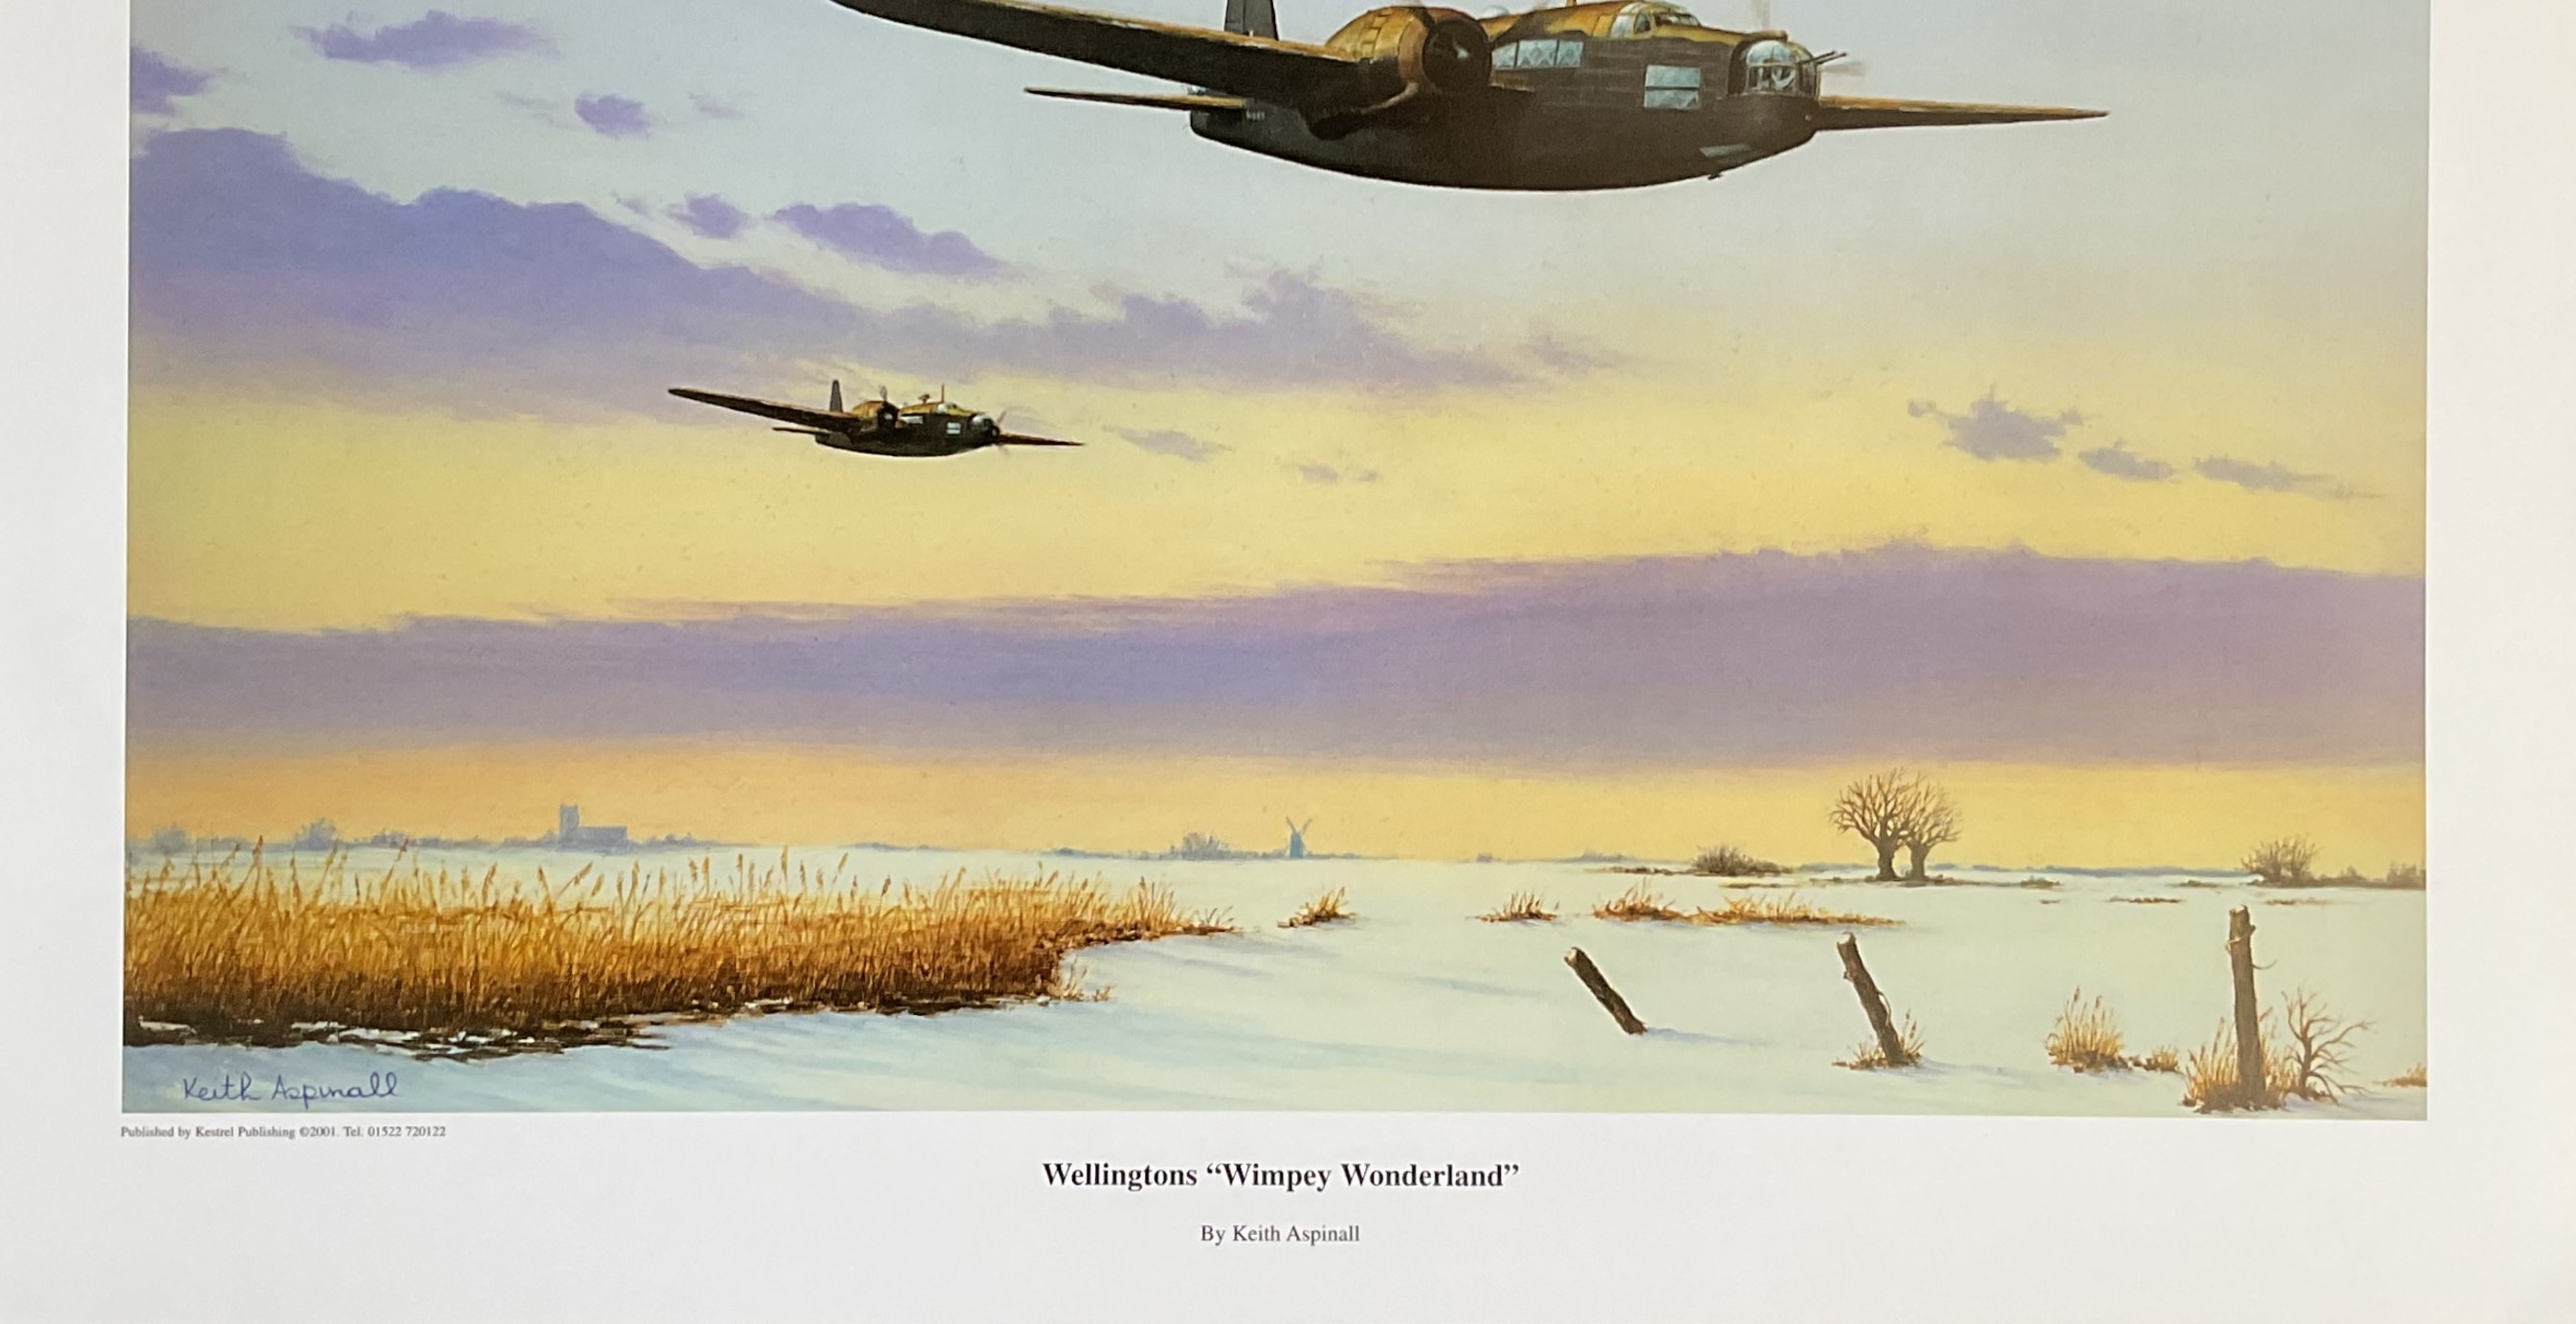 WW2 Colour Print Titled Wellingtons Whimpey Wonderland by Keith Aspinall. Measures 16x12 inches - Image 5 of 6